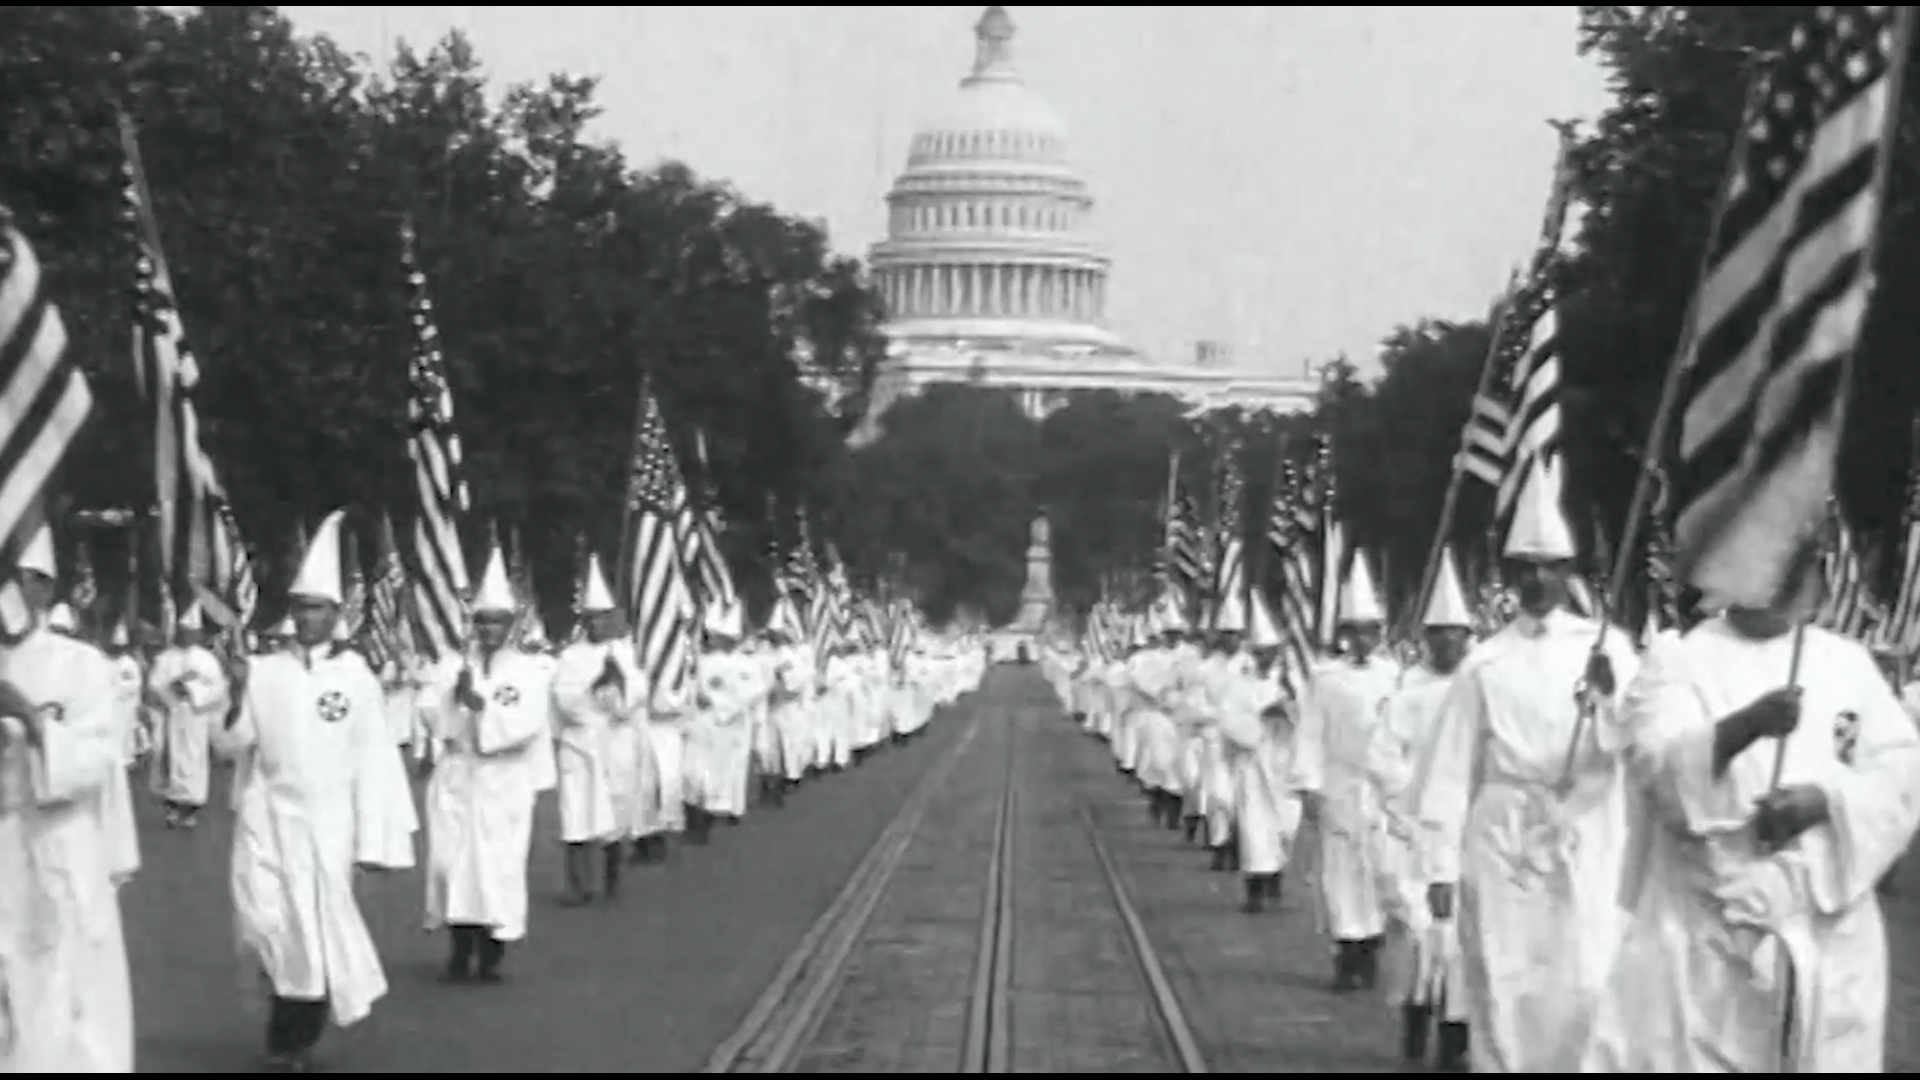 Are all people equal or are we still in the era of the Ku Klux Klan law?